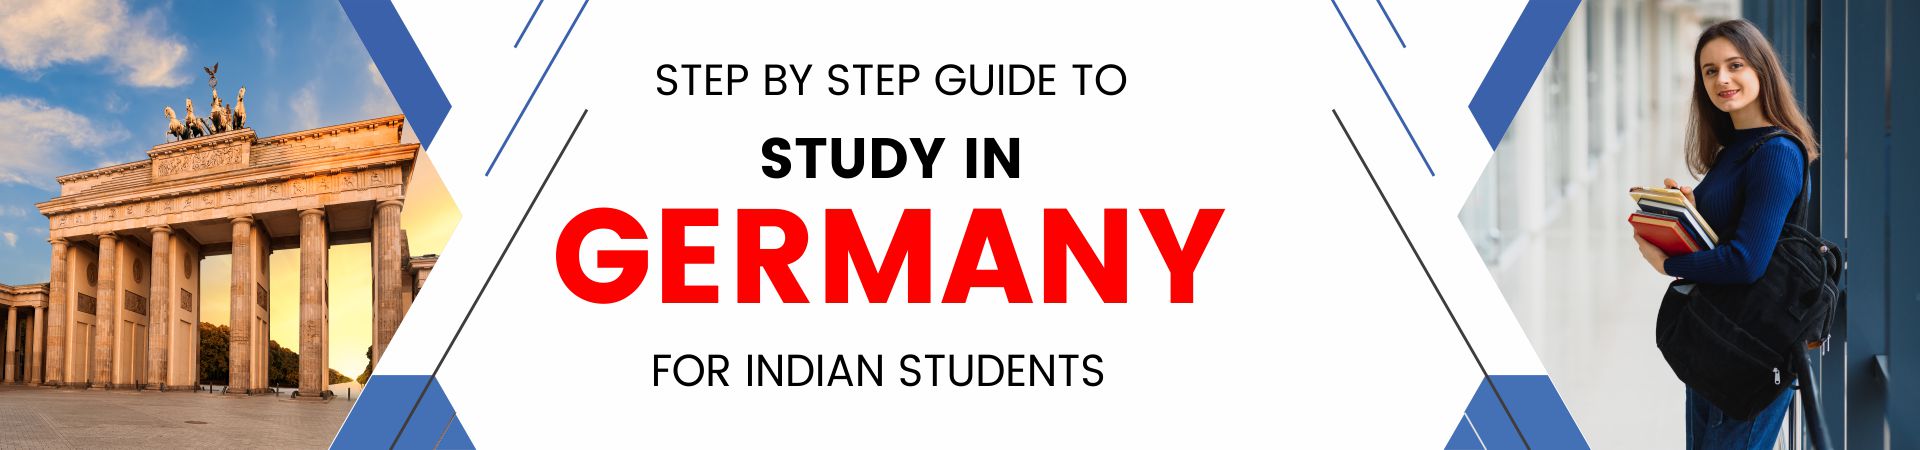 Step by Step Guide to Study in Germany for Indian Students